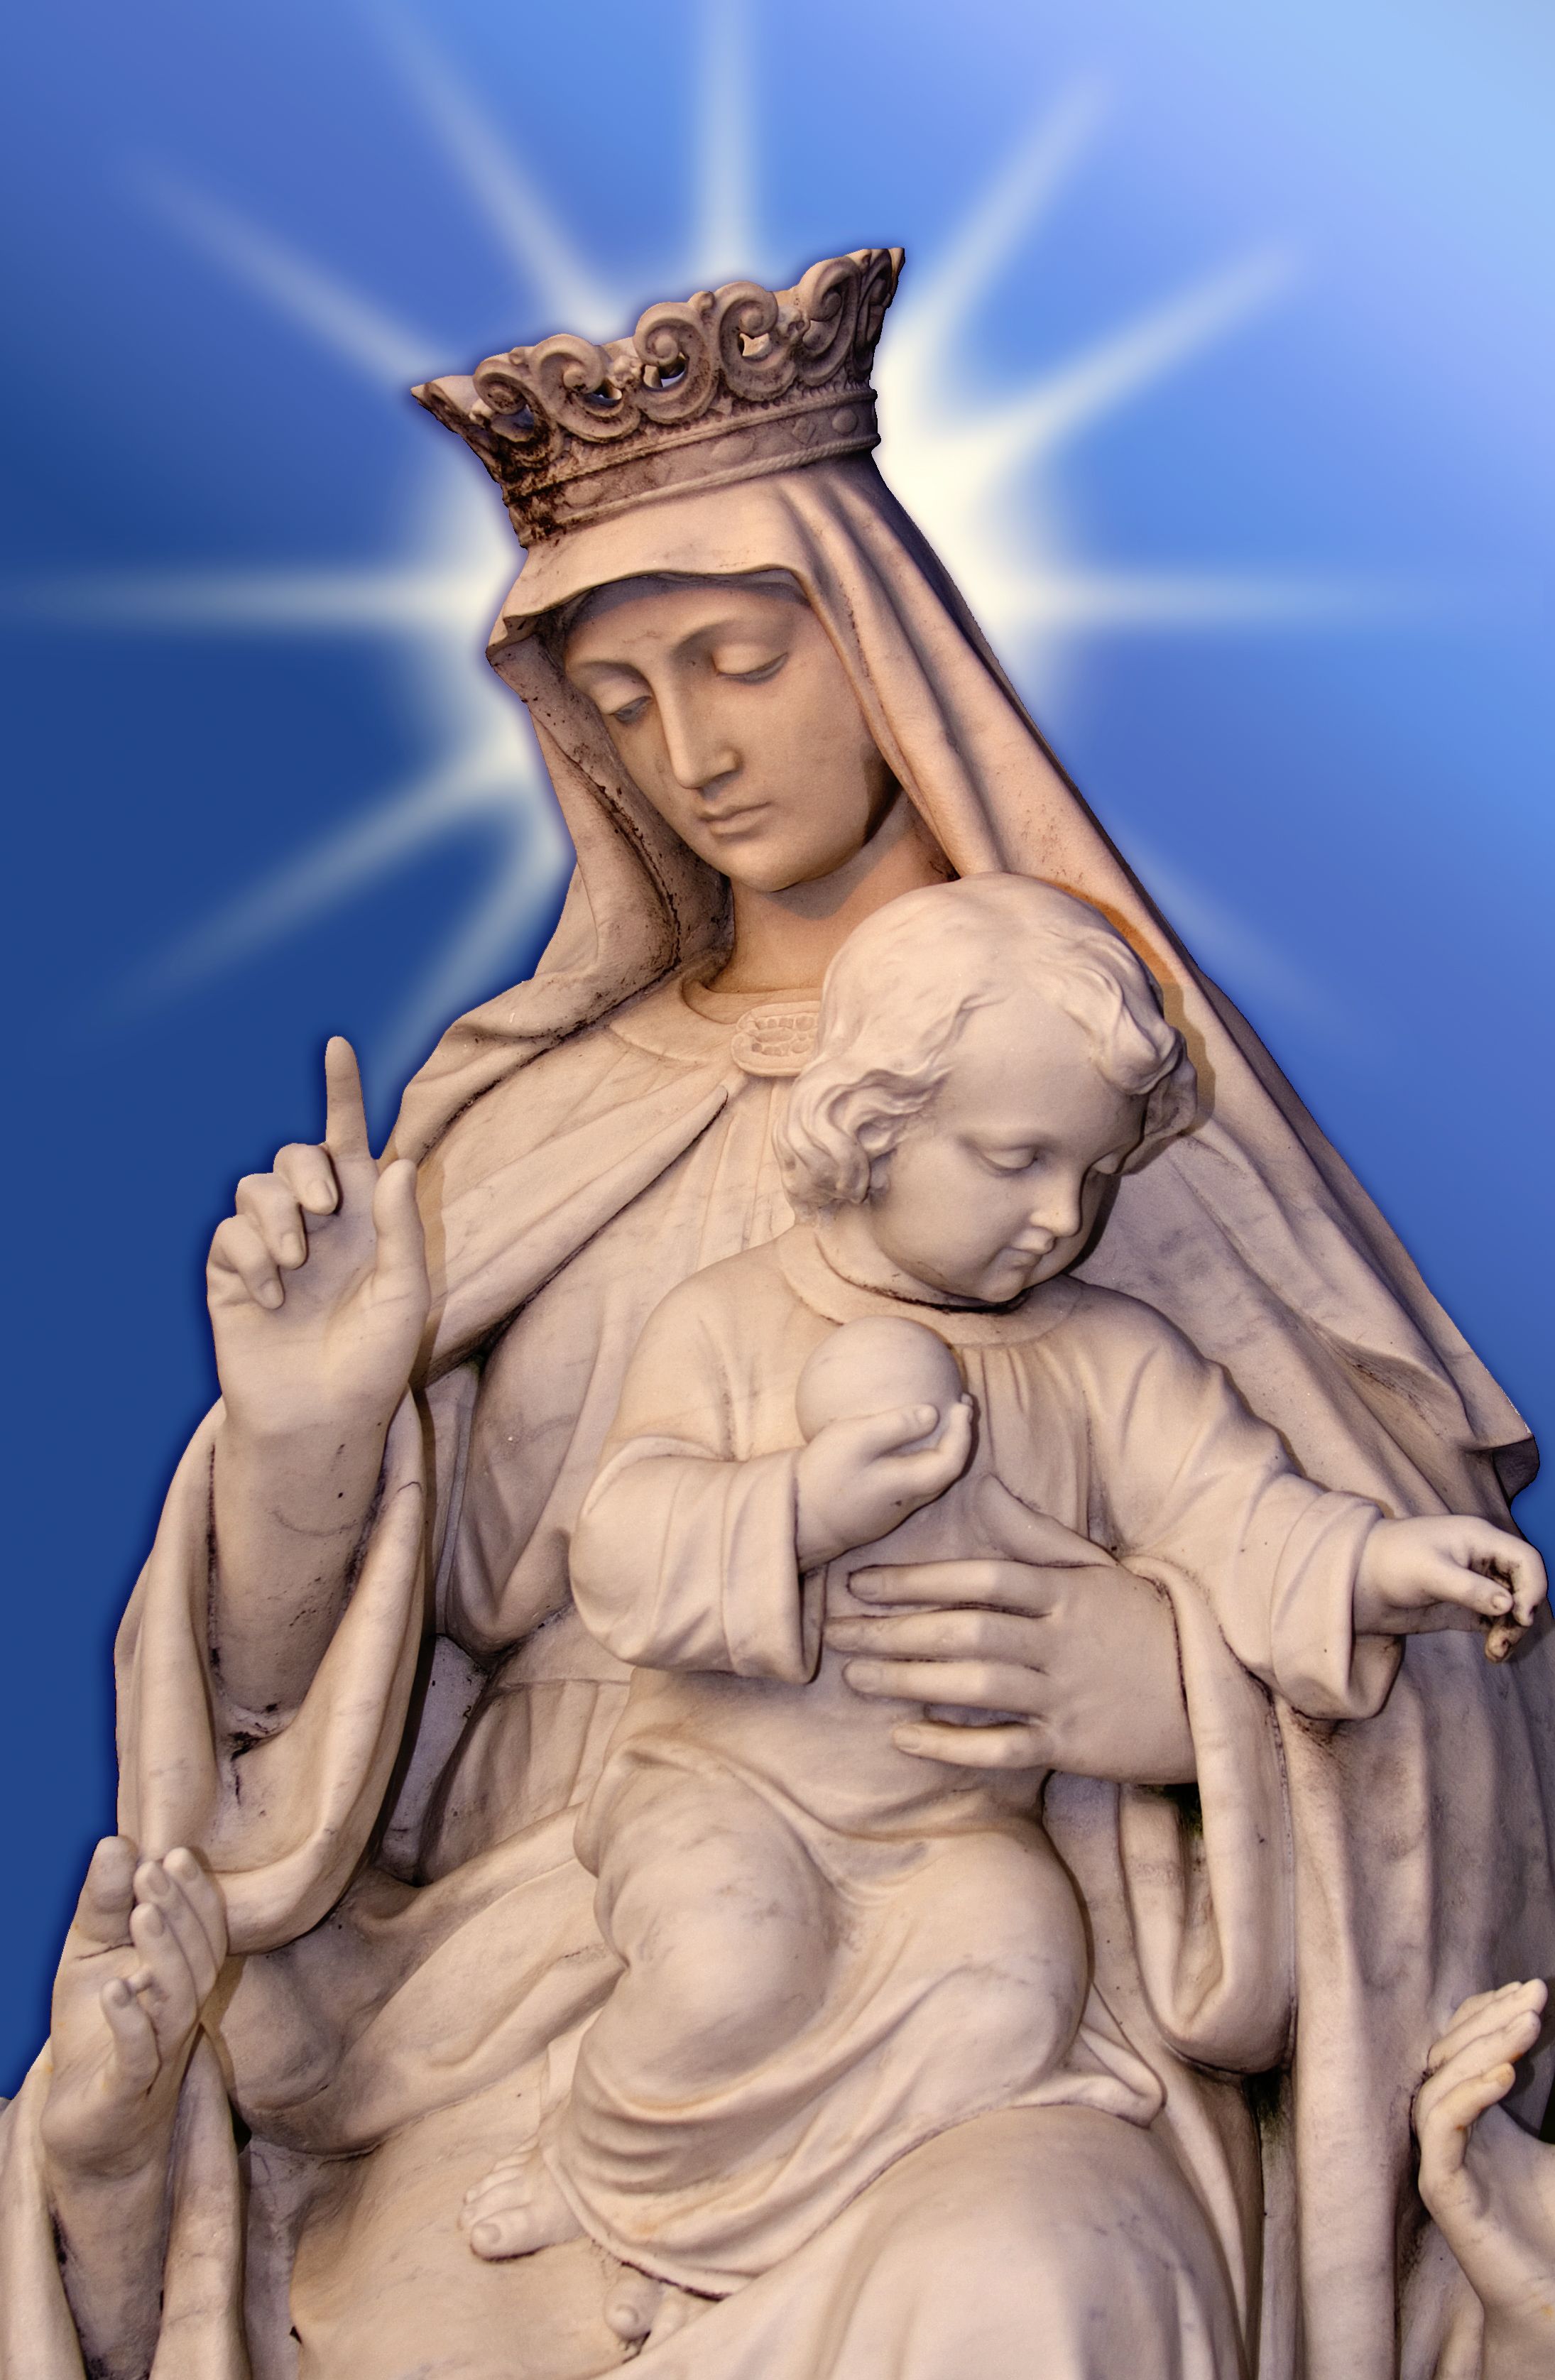 [69+] Mother Mary With Baby Jesus Wallpaper on WallpaperSafari